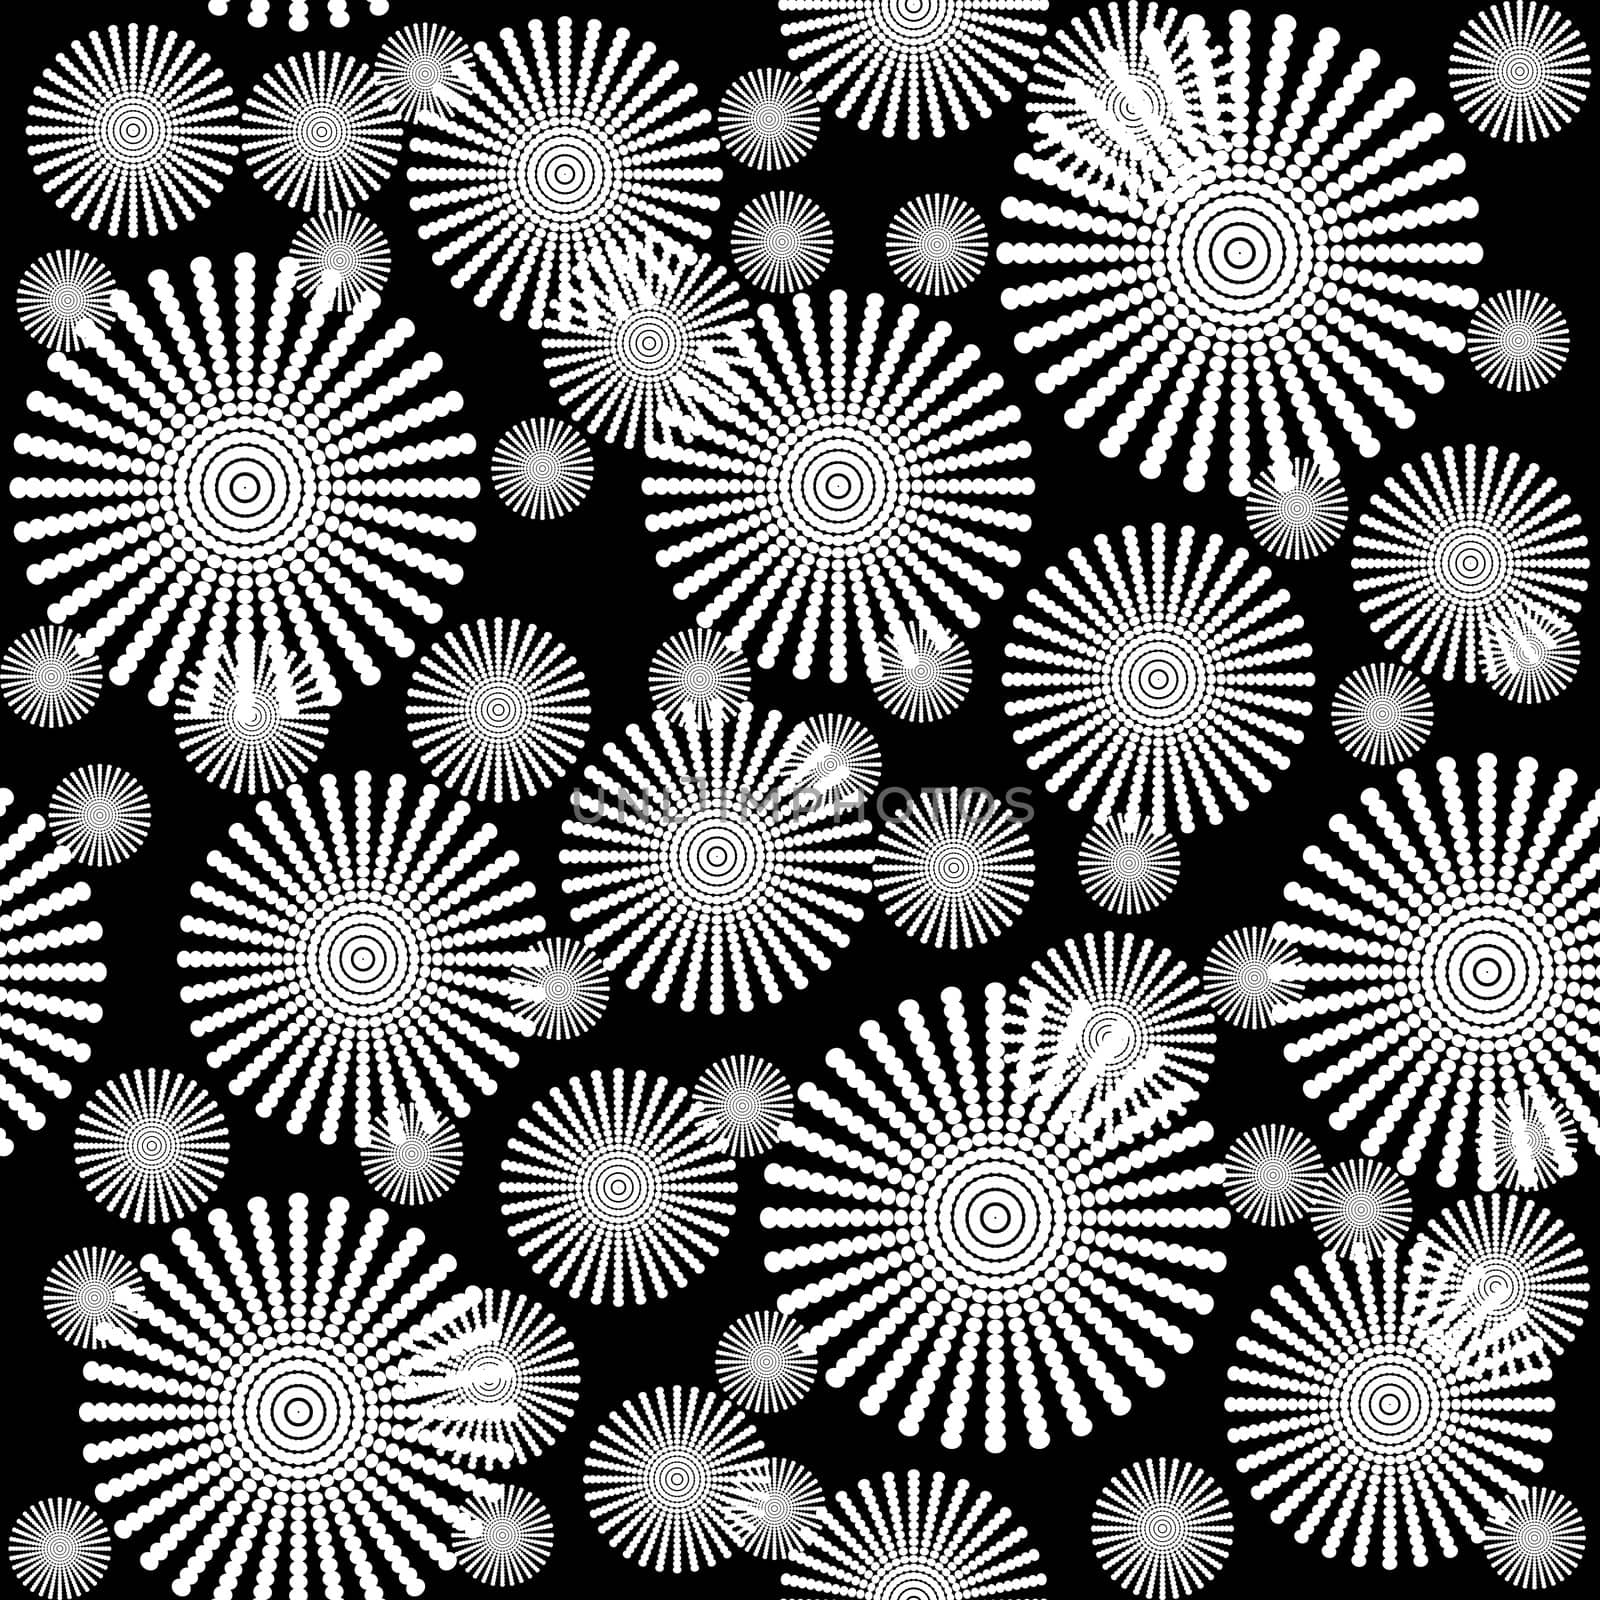 Black and white floral background, seamless pattern by hibrida13